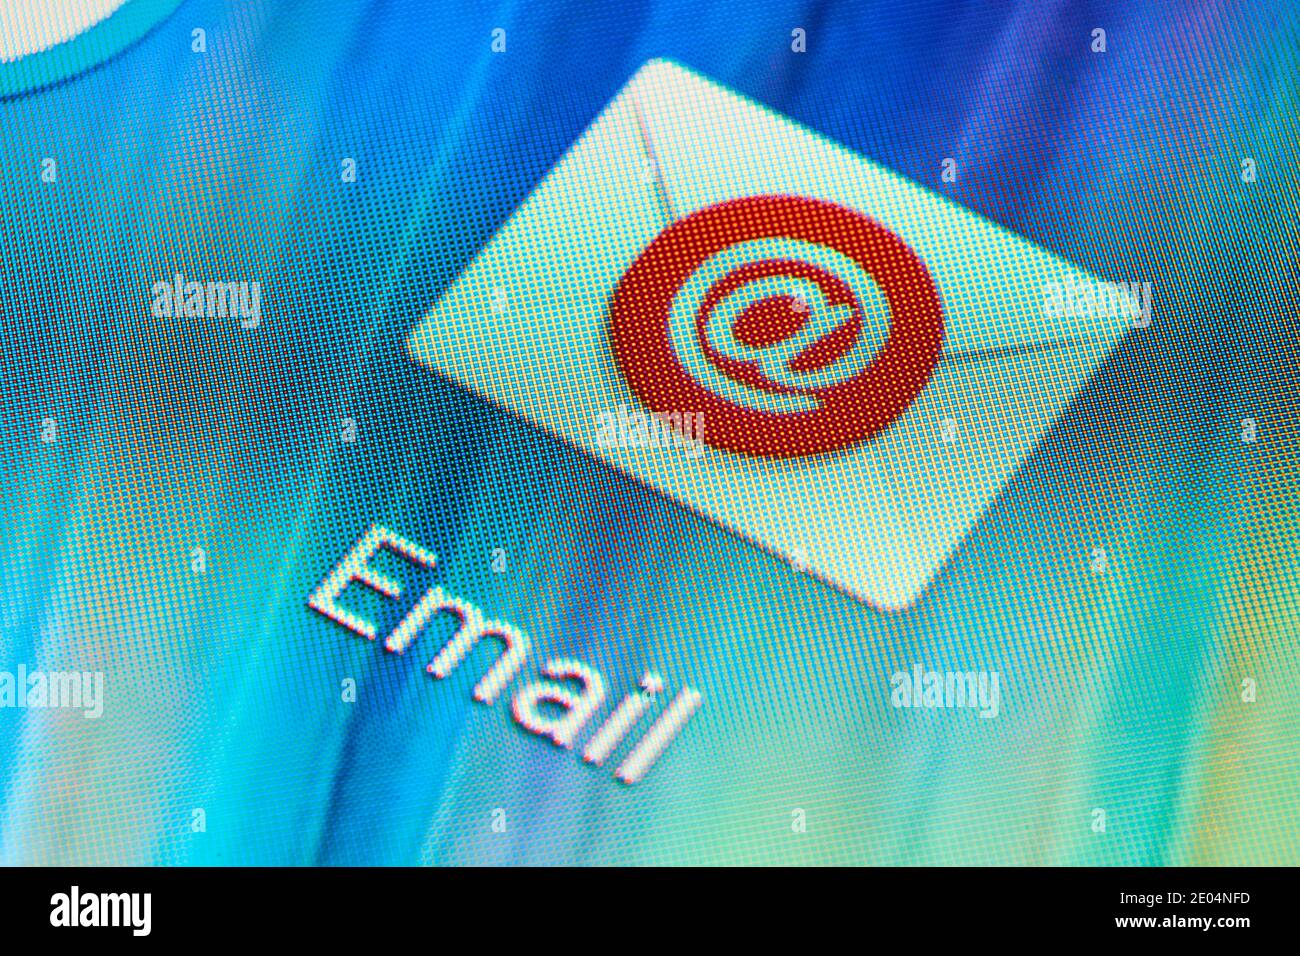 BUENOS AIRES, ARGENTINA - JULY 18, 2019: Macro shot of email mobile application icon on Android phone screen. Common emailing app. Stock Photo